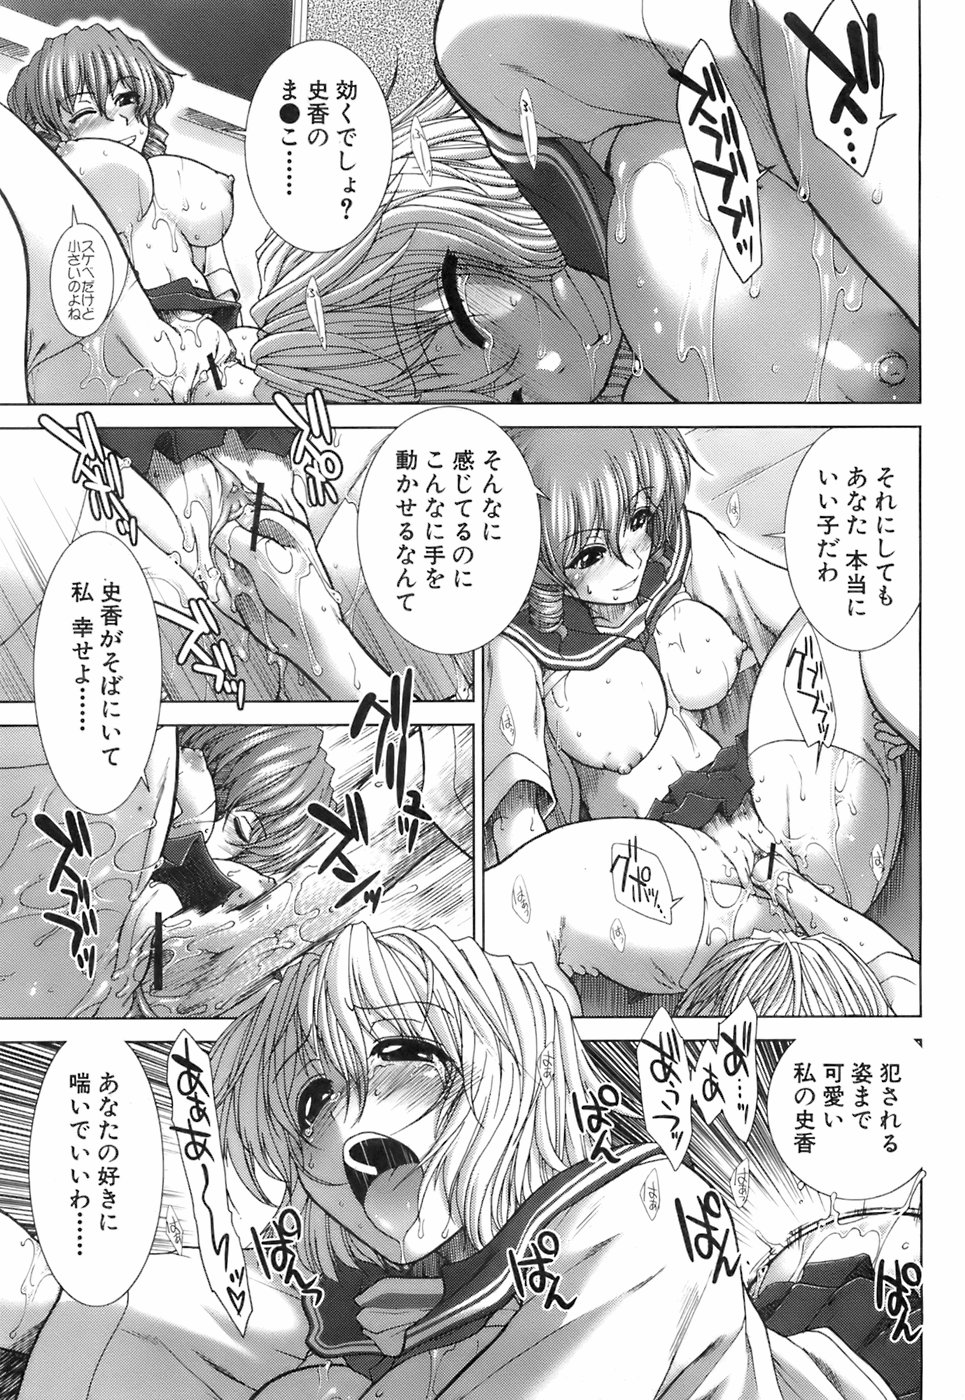 Buster Comic Vol. 3 [2008-01] page 28 full